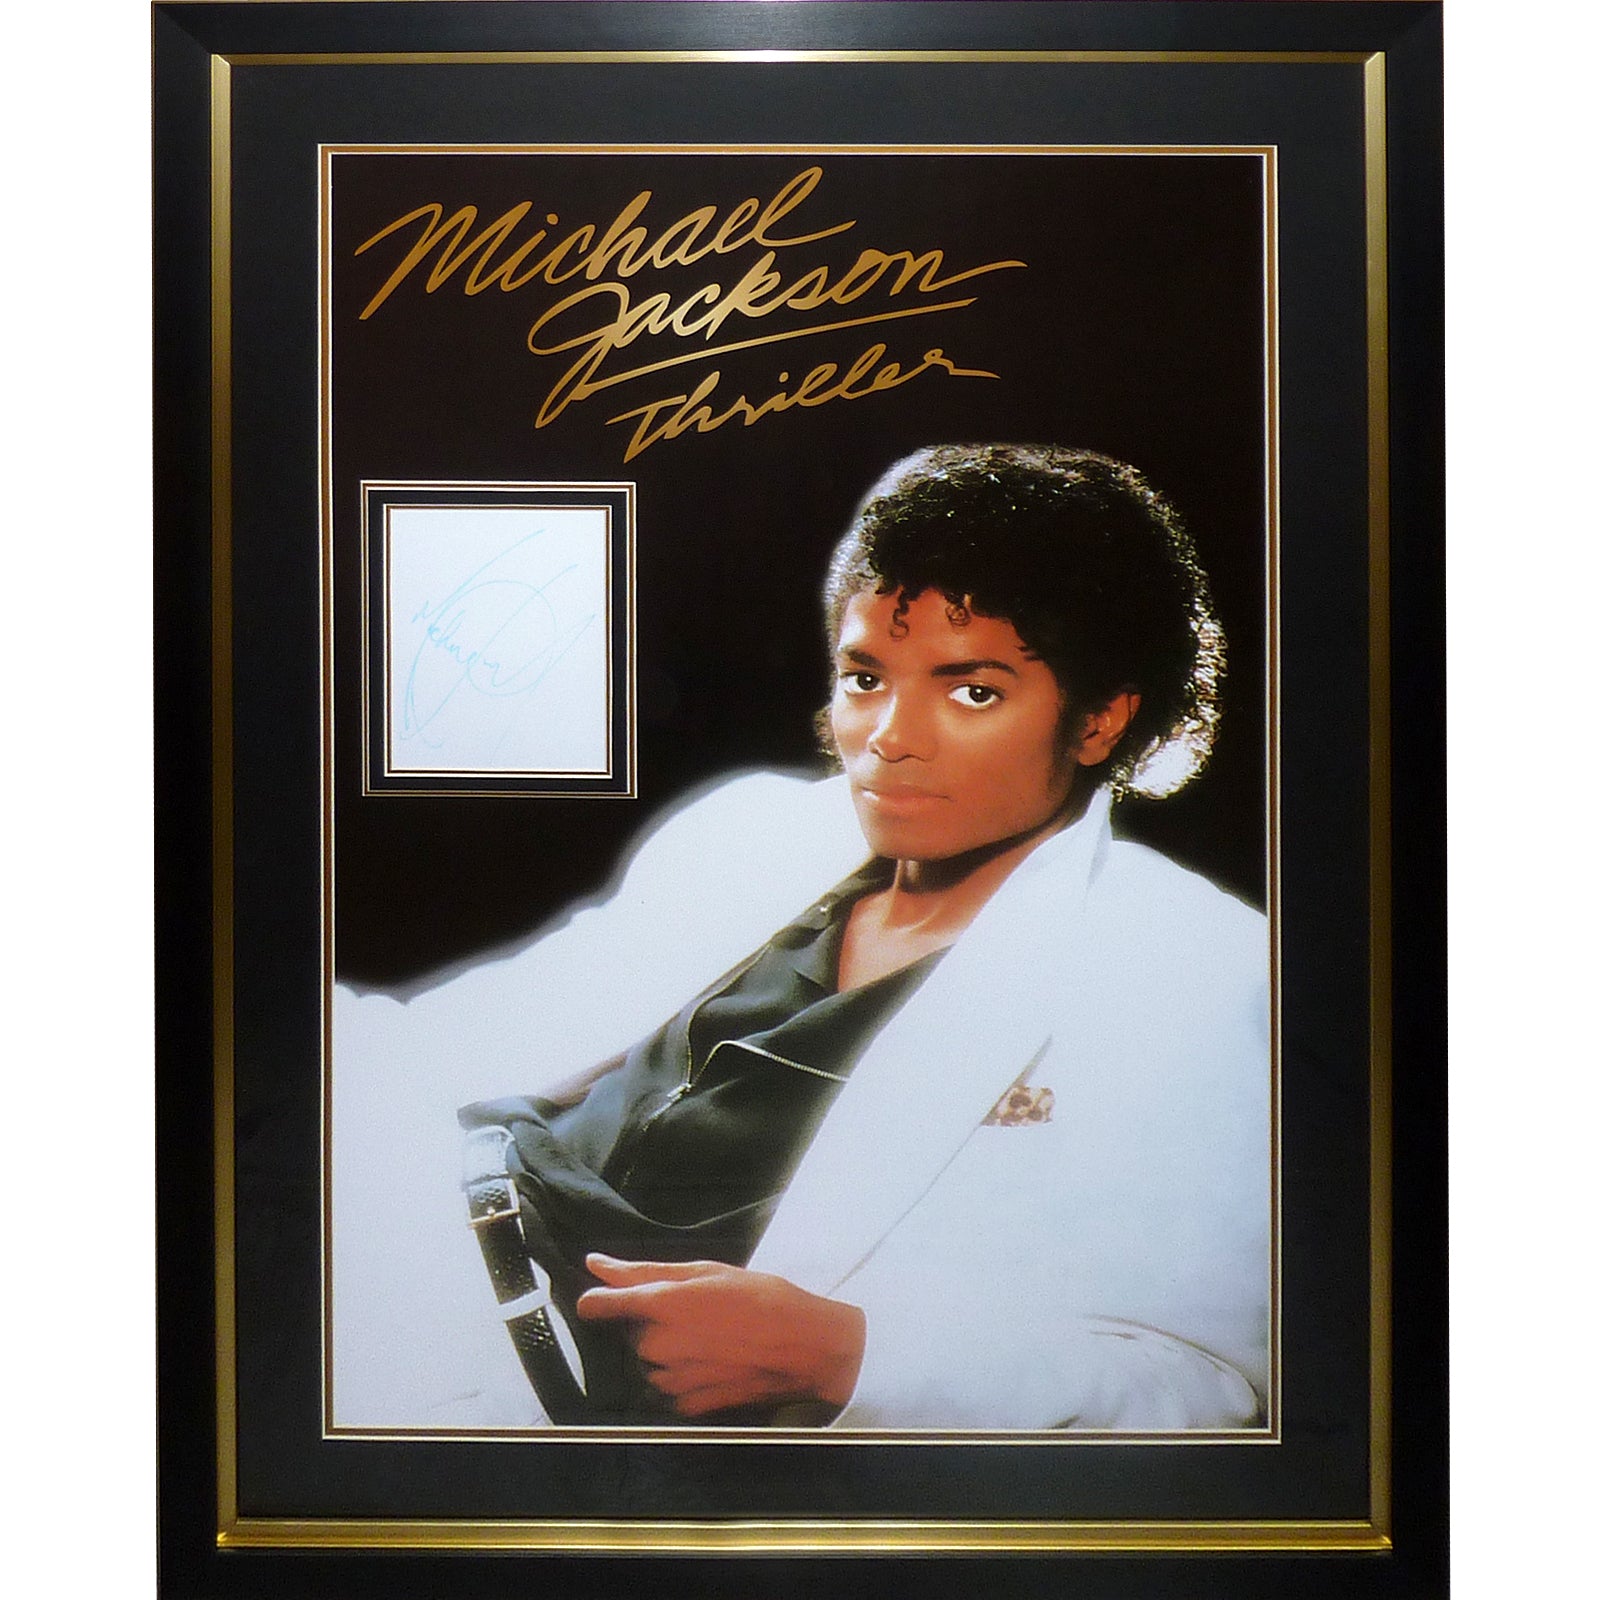 Michael Jackson Full-Size Thriller Movie Poster Deluxe Framed with Autograph - JSA